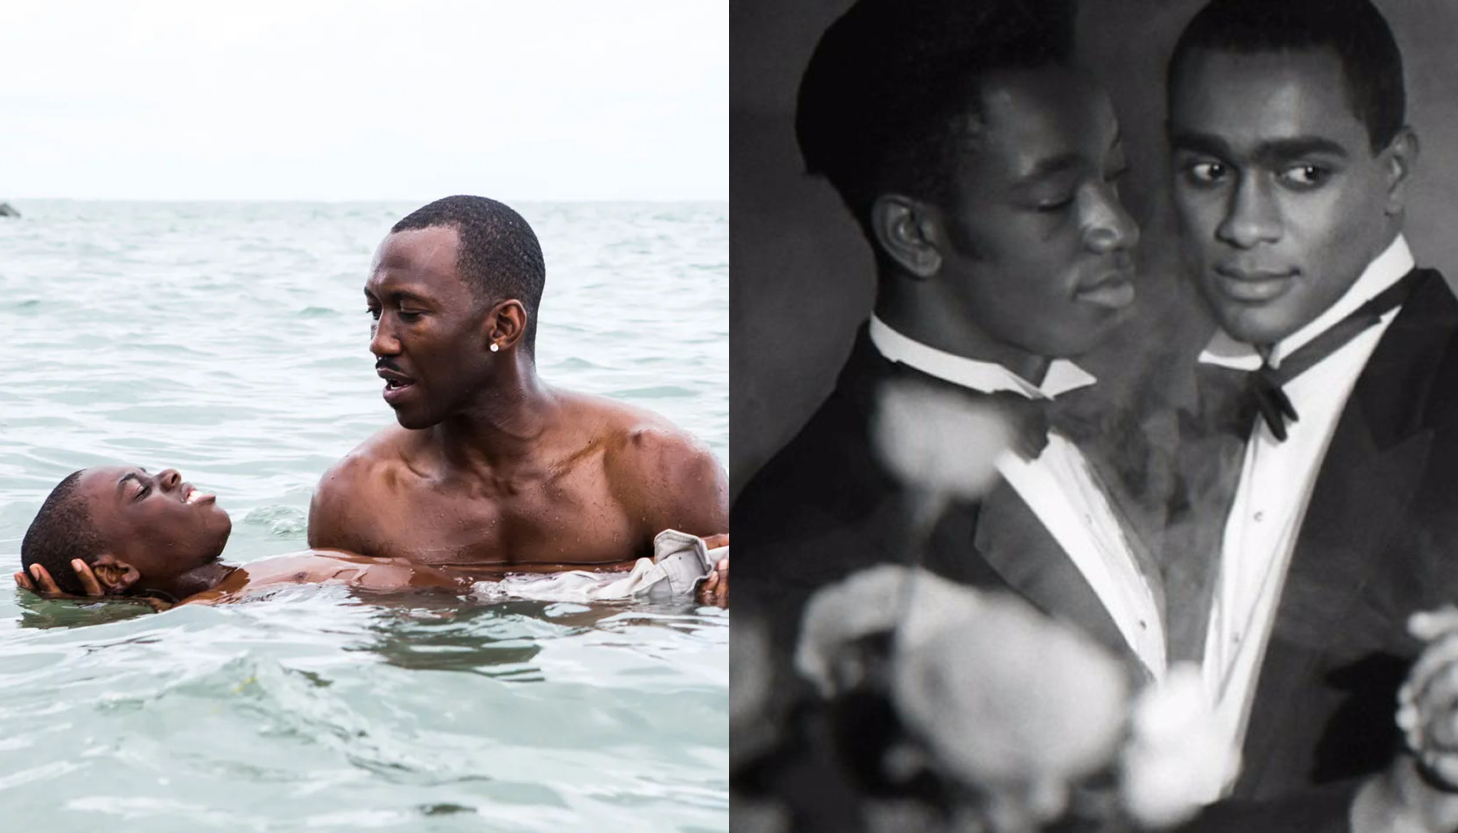 A composite image of two stills from Moonlight and Looking for Langston.